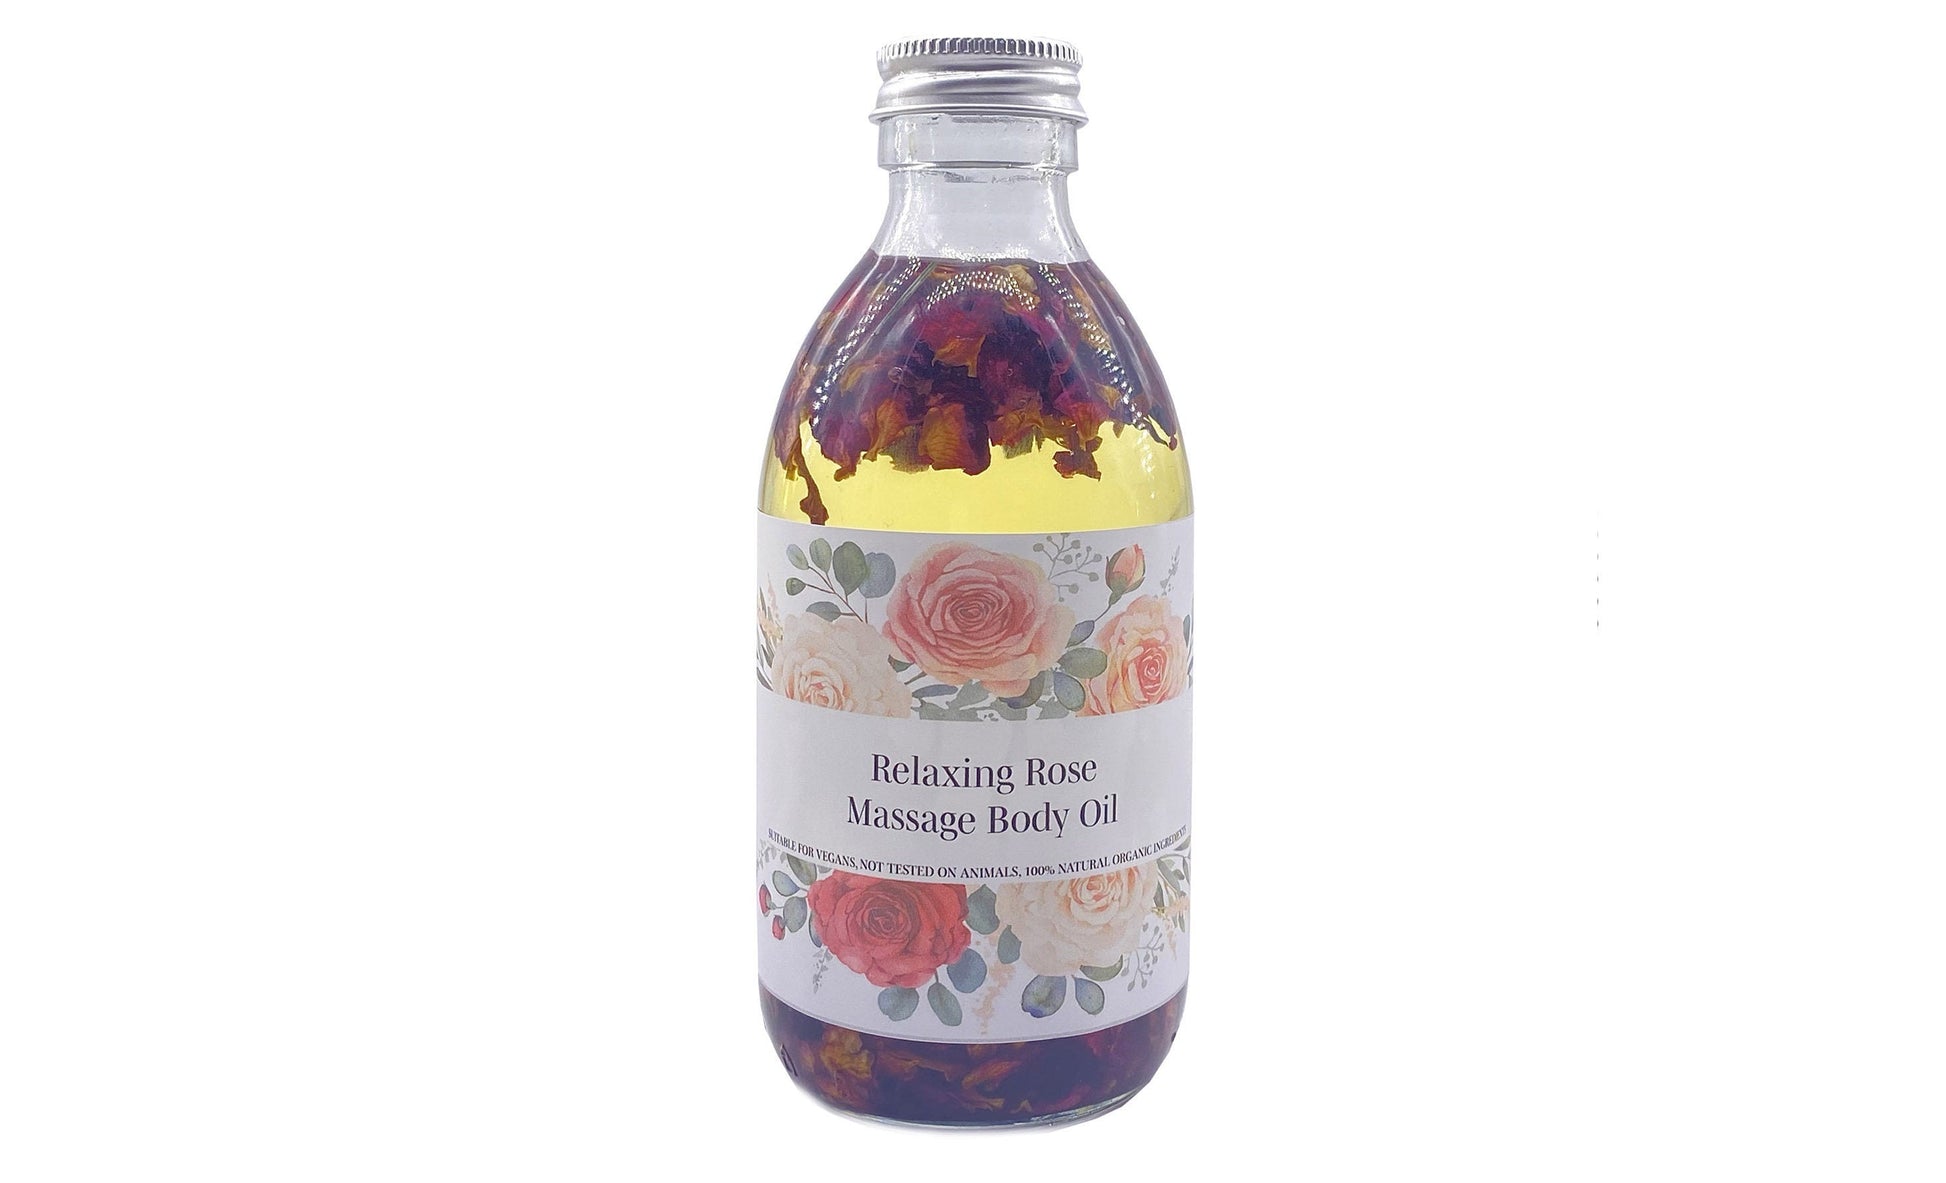 Relaxing Rose Massage Body Oil infused with Rose Petals - Funky Soap Shop